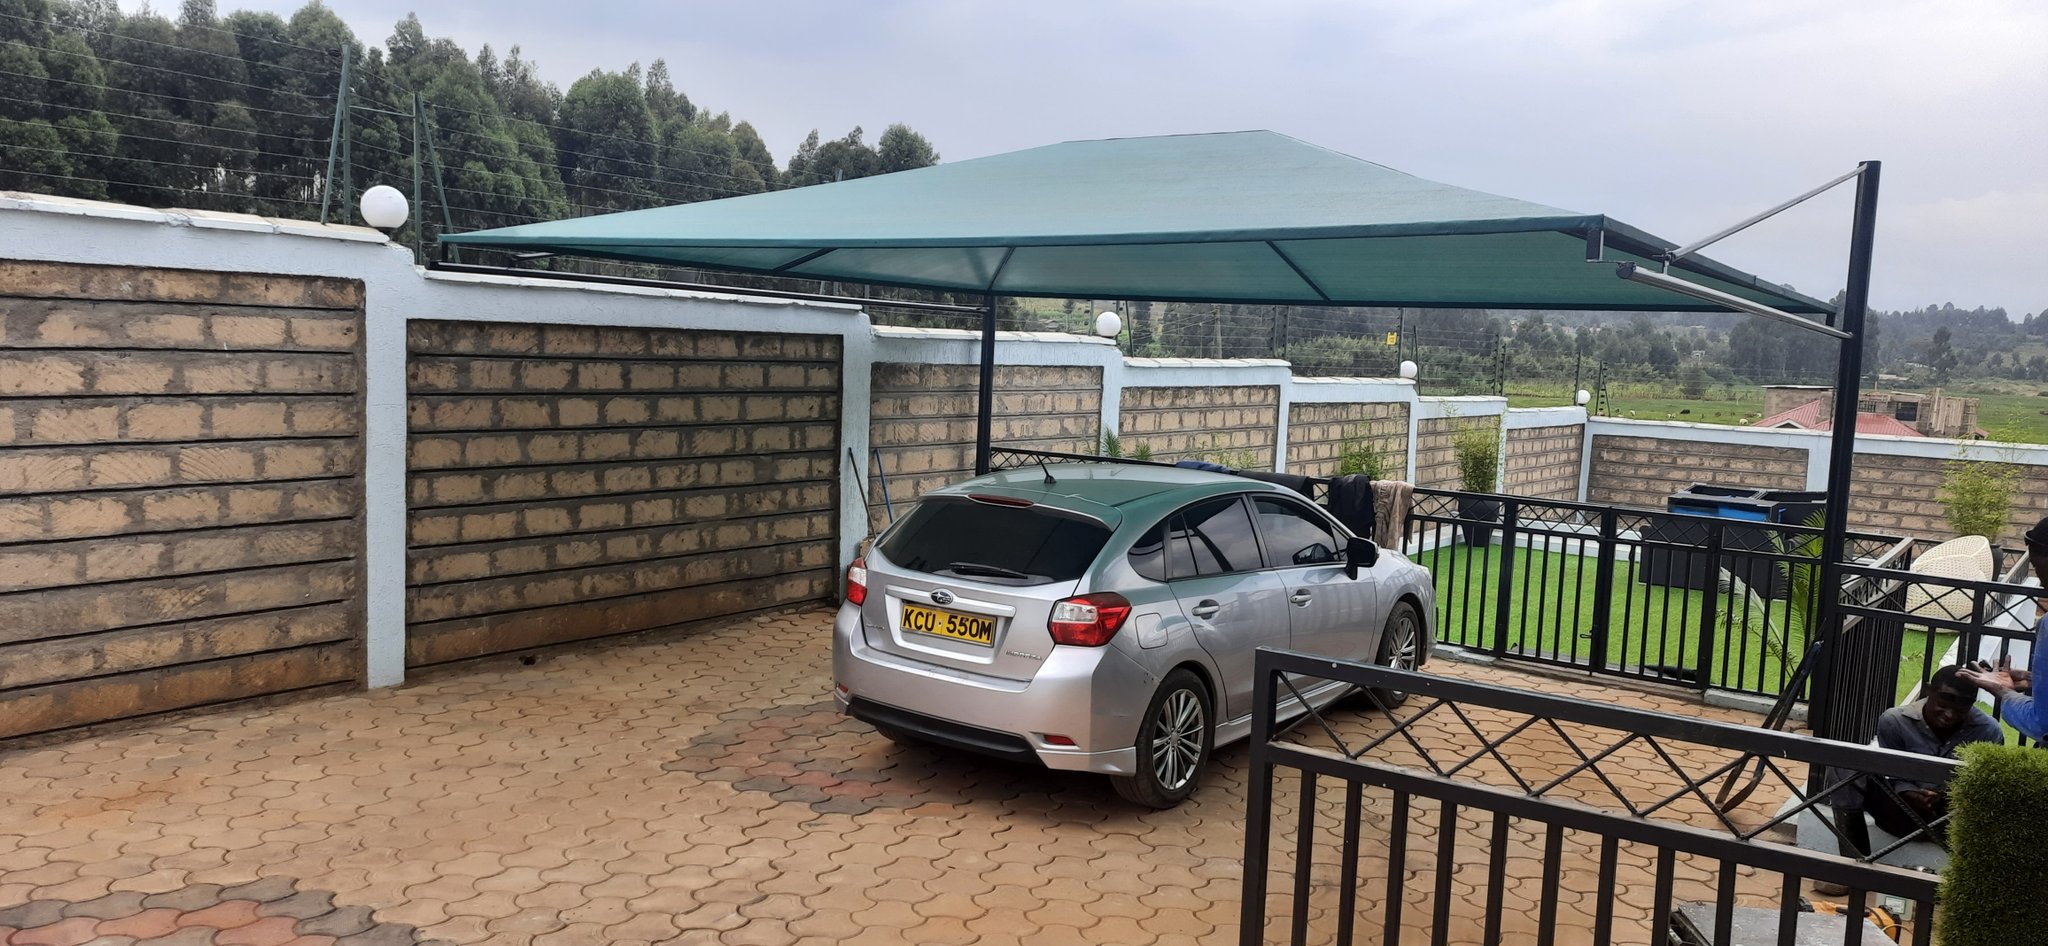 Car Shade-Carport-Cantilever Parking Shade-Car Canopy for Commercial and Residential Use-Vehicle Parking Shades for Offices, Homes, Schools, Hospitals, Churches, Factories, Restaurants, Hotels, Airports-Car Wash Shade